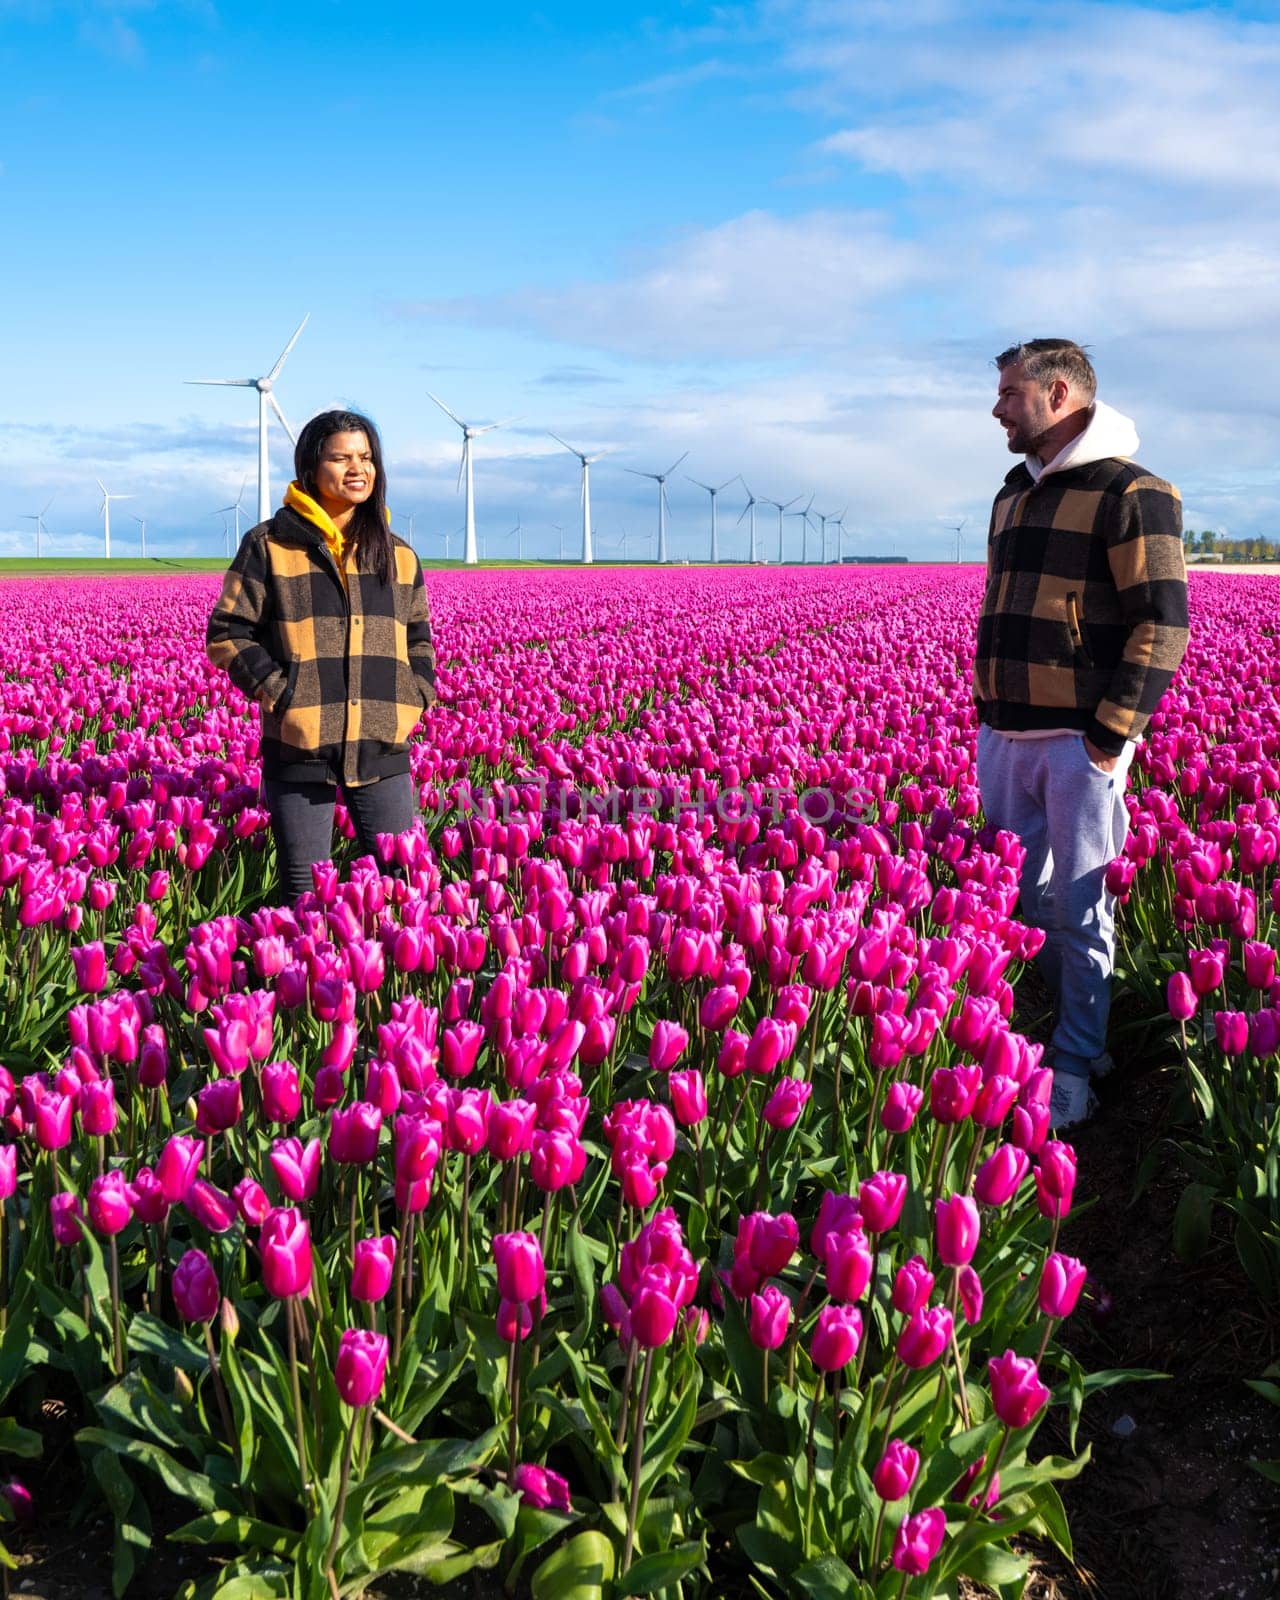 A couple holding hands, standing gracefully among a vibrant field of flowers, surrounded by windmill turbines in the Netherlands in Spring by fokkebok